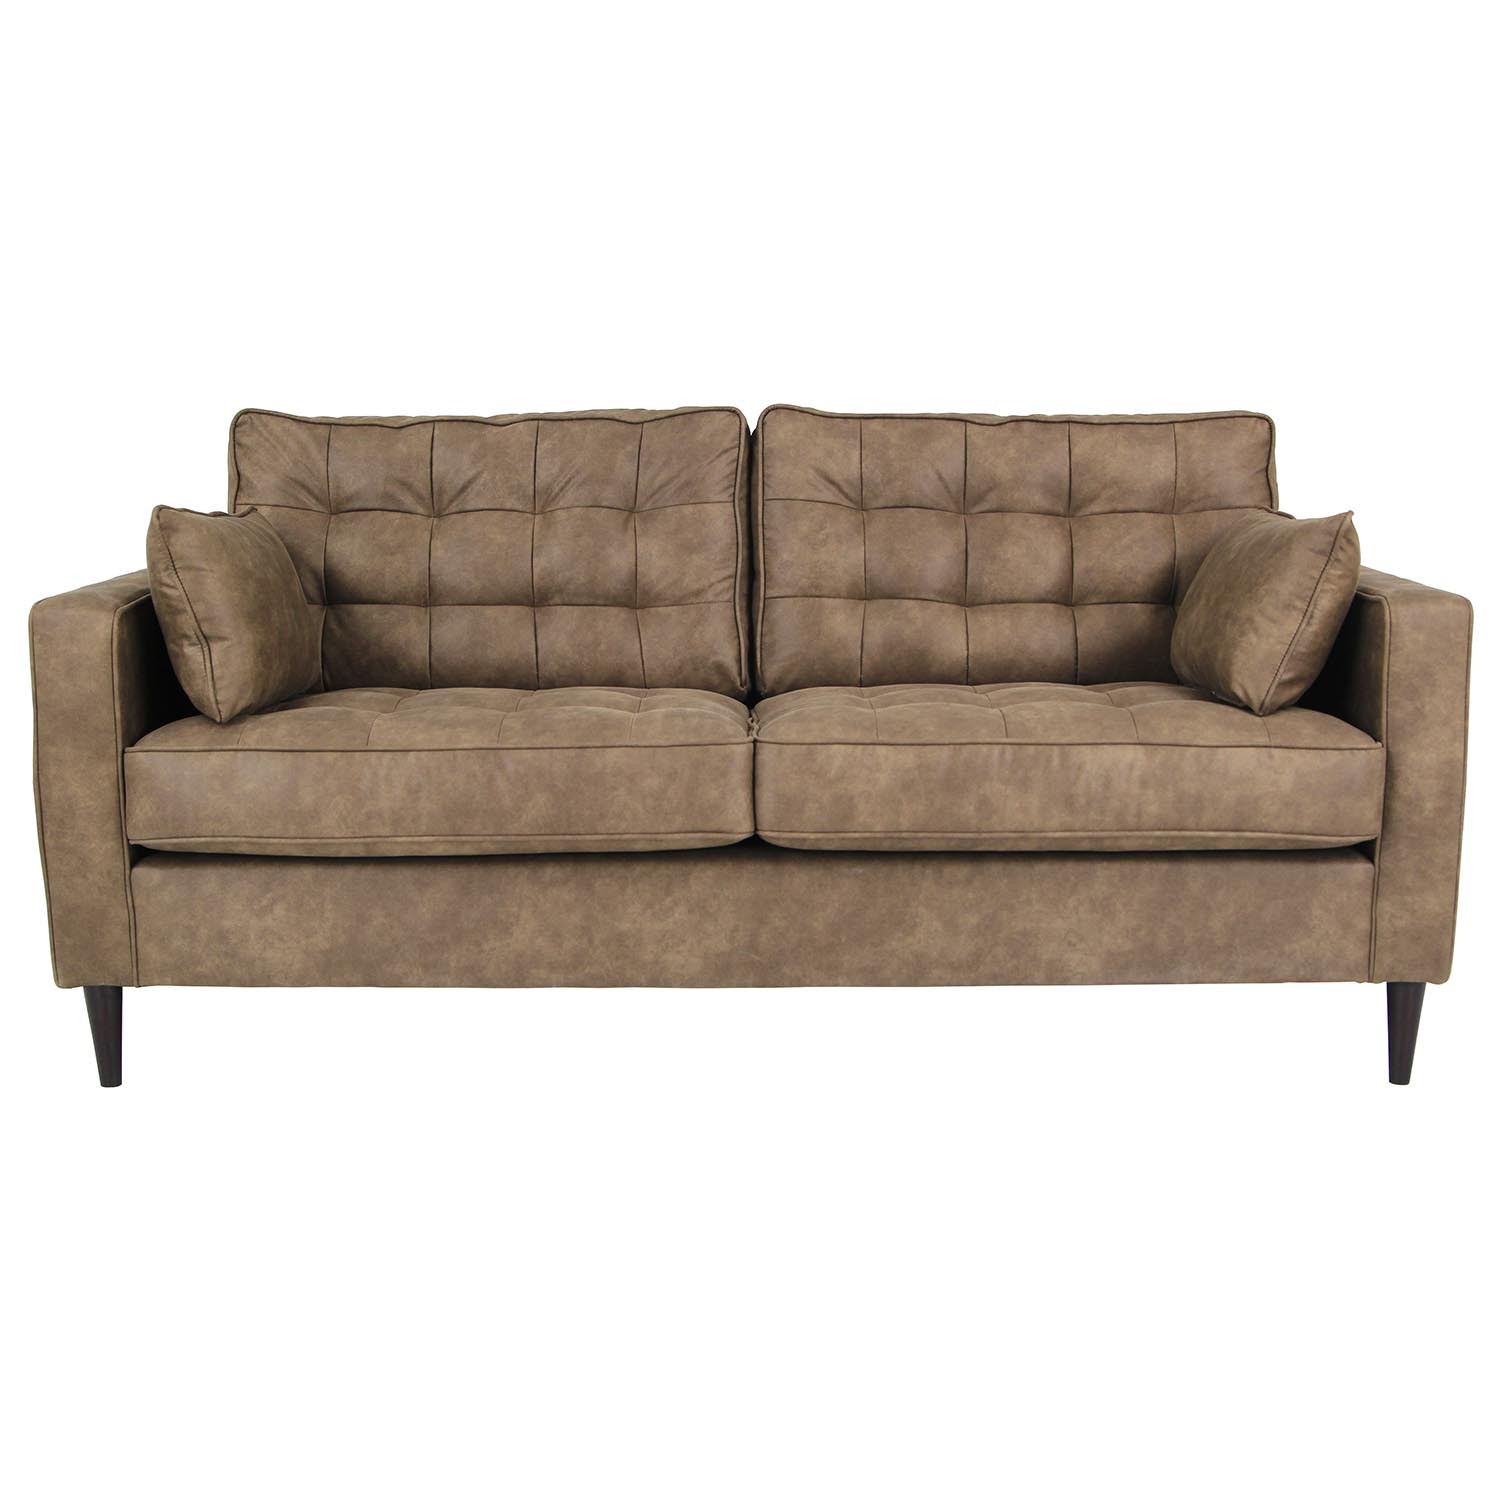 Anabelle 3 Seater Brown Fabric Sofa Image 2